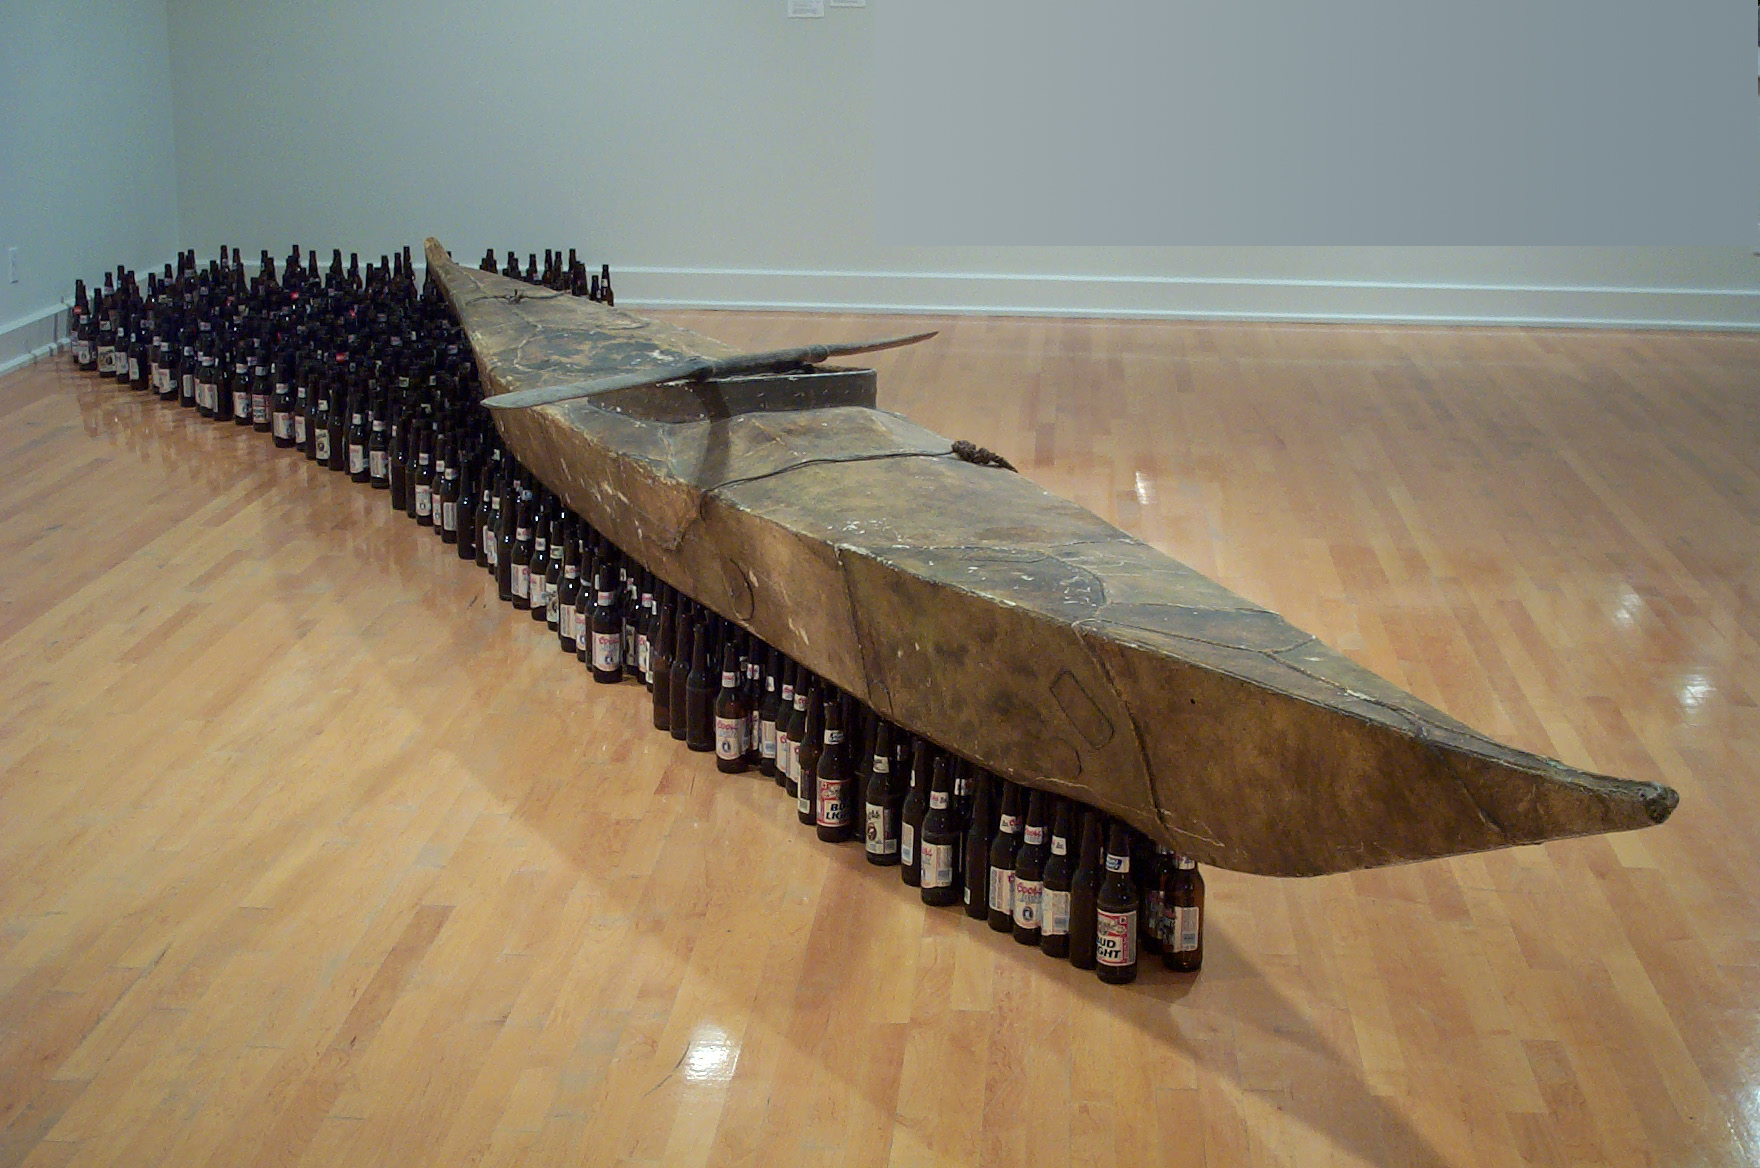 Image credits (l–r): File Name: Kcho 1998.410.001a.JPG Kcho, Para olvidar (In Order to Forget), 1996. Kayak and beer bottles. Collection of ASU Art Museum. Purchased with funds provided by the ASU Art Museum Store, the Friends of the ASUAM, and by The FUNd at Arizona State University Art Museum. Photography by Craig Smith